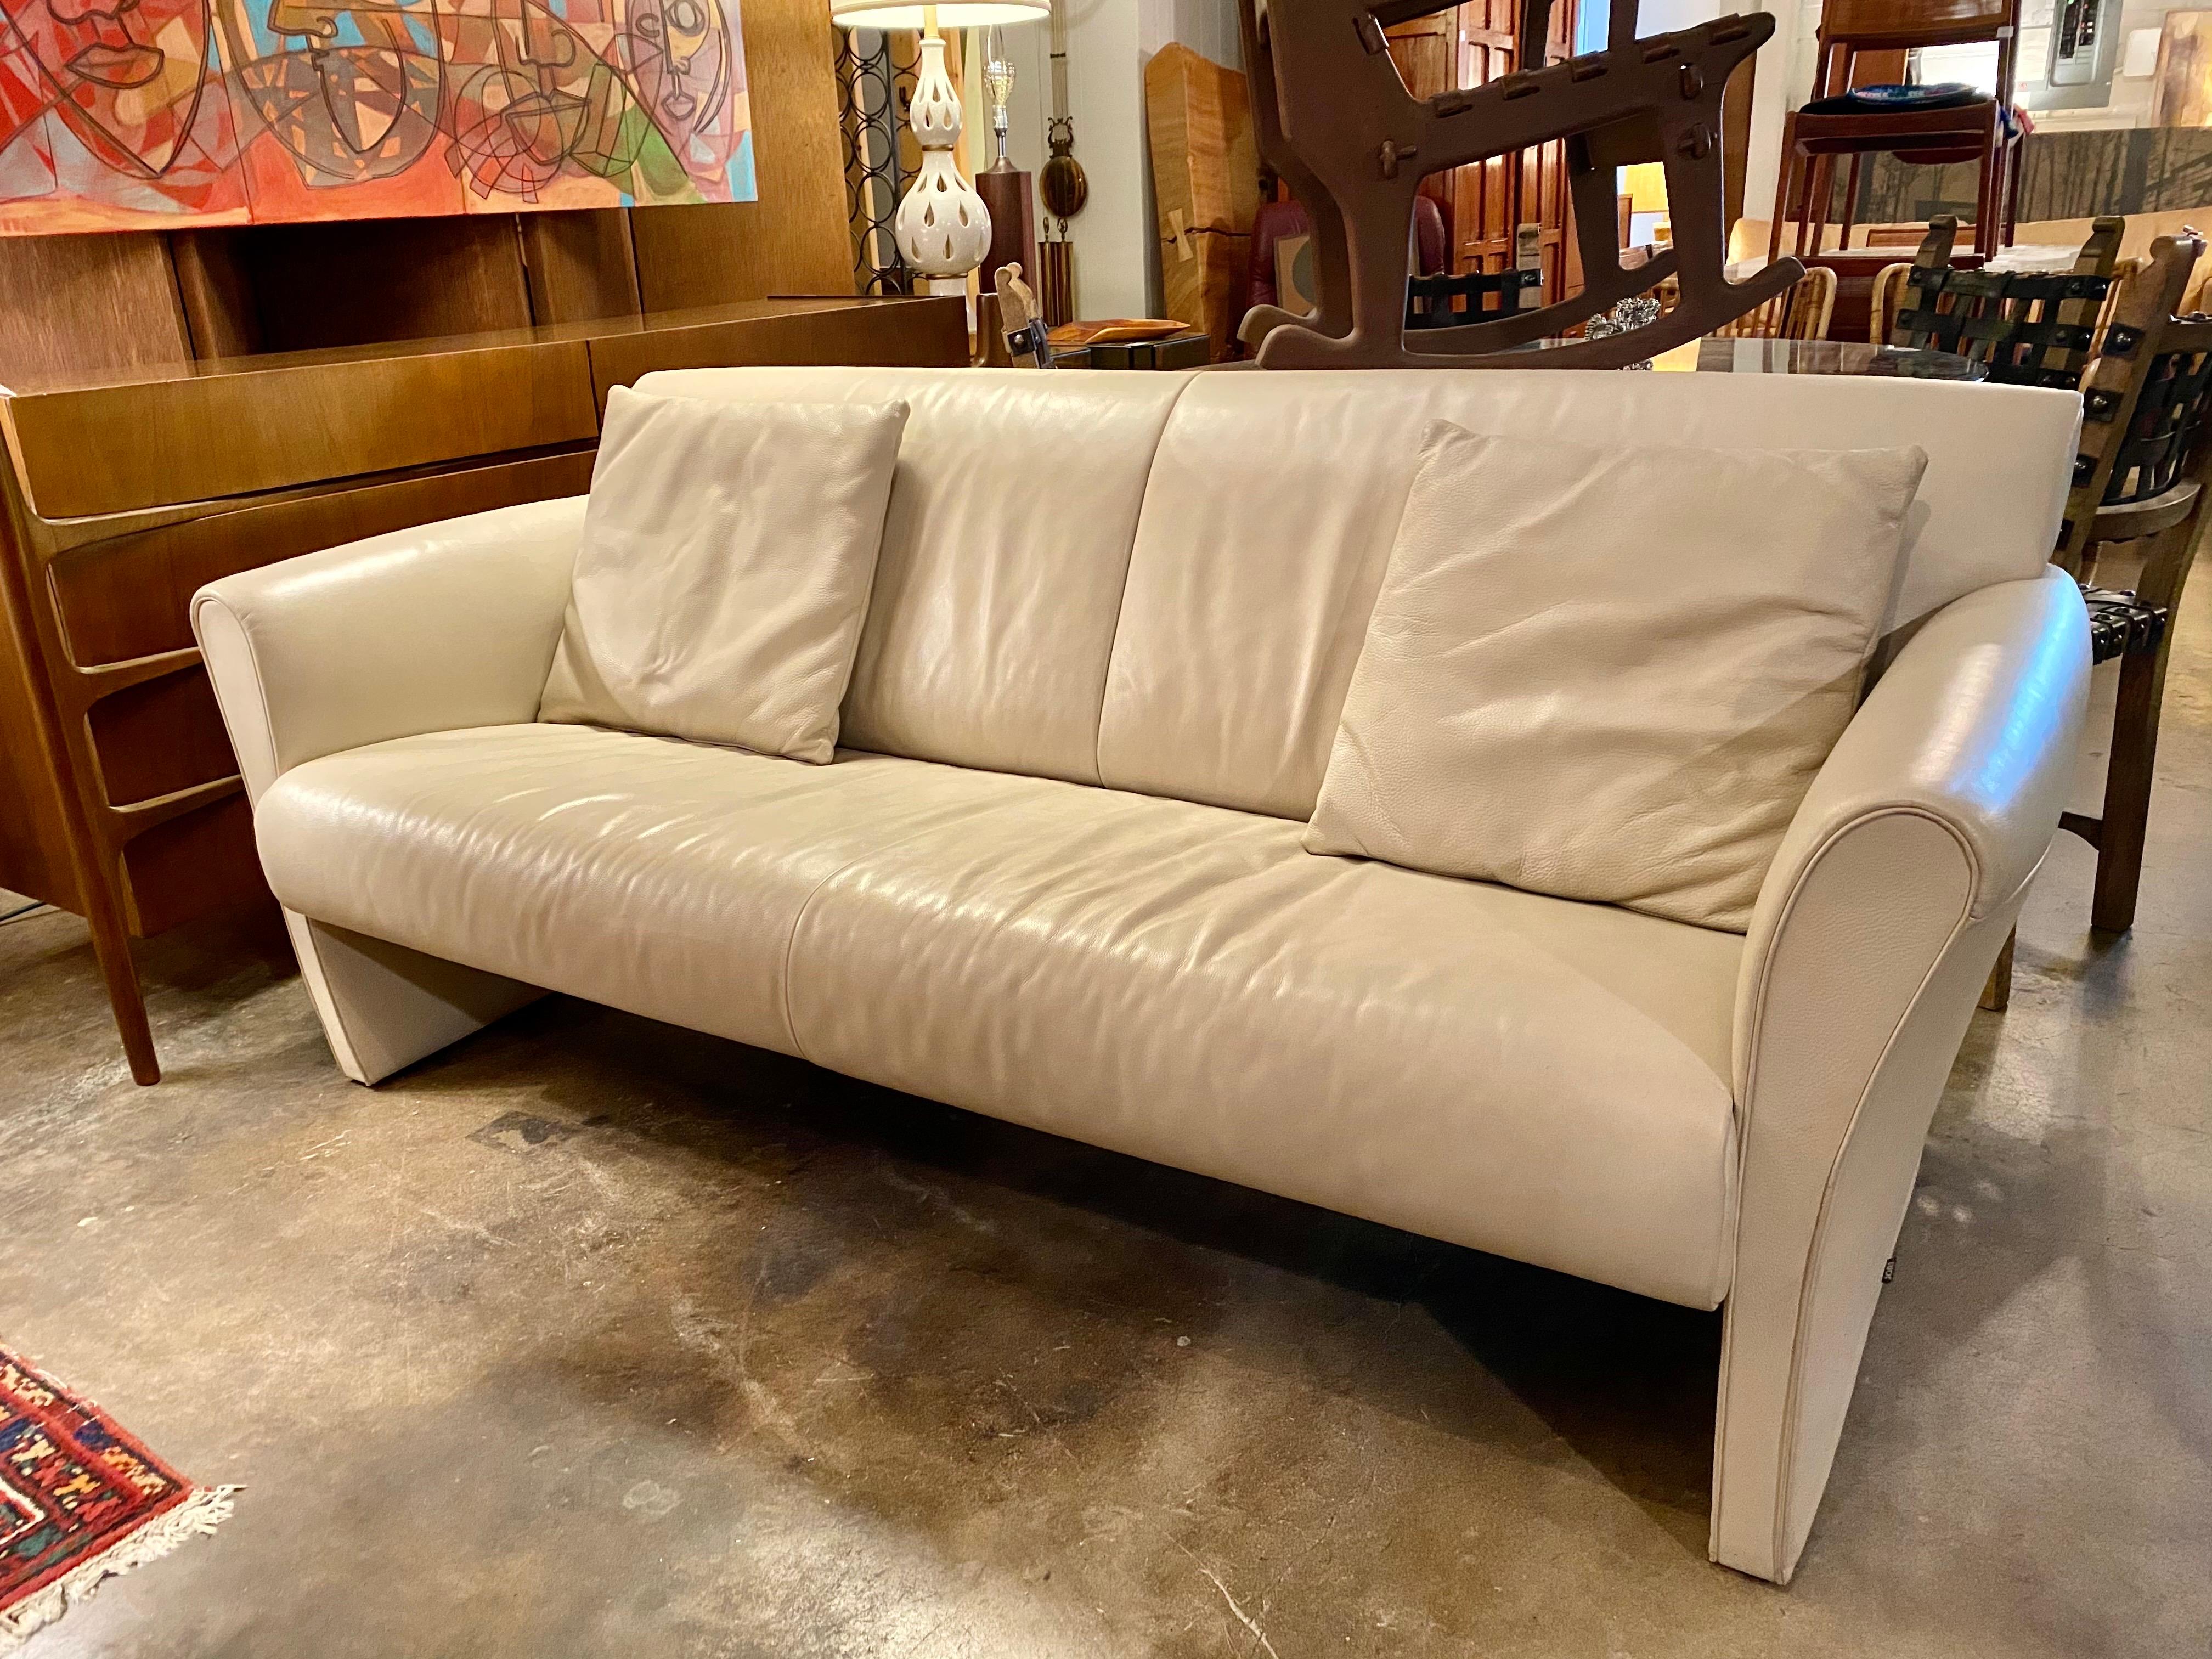 Vintage leather sofa in a cream color, Belgium, circa 1990’s. Founded in 1963, Jori is a Belgian company that specializes in high-quality and contemporary leather and fabric seating furniture.  This vintage leather sofa is in good overall condition.